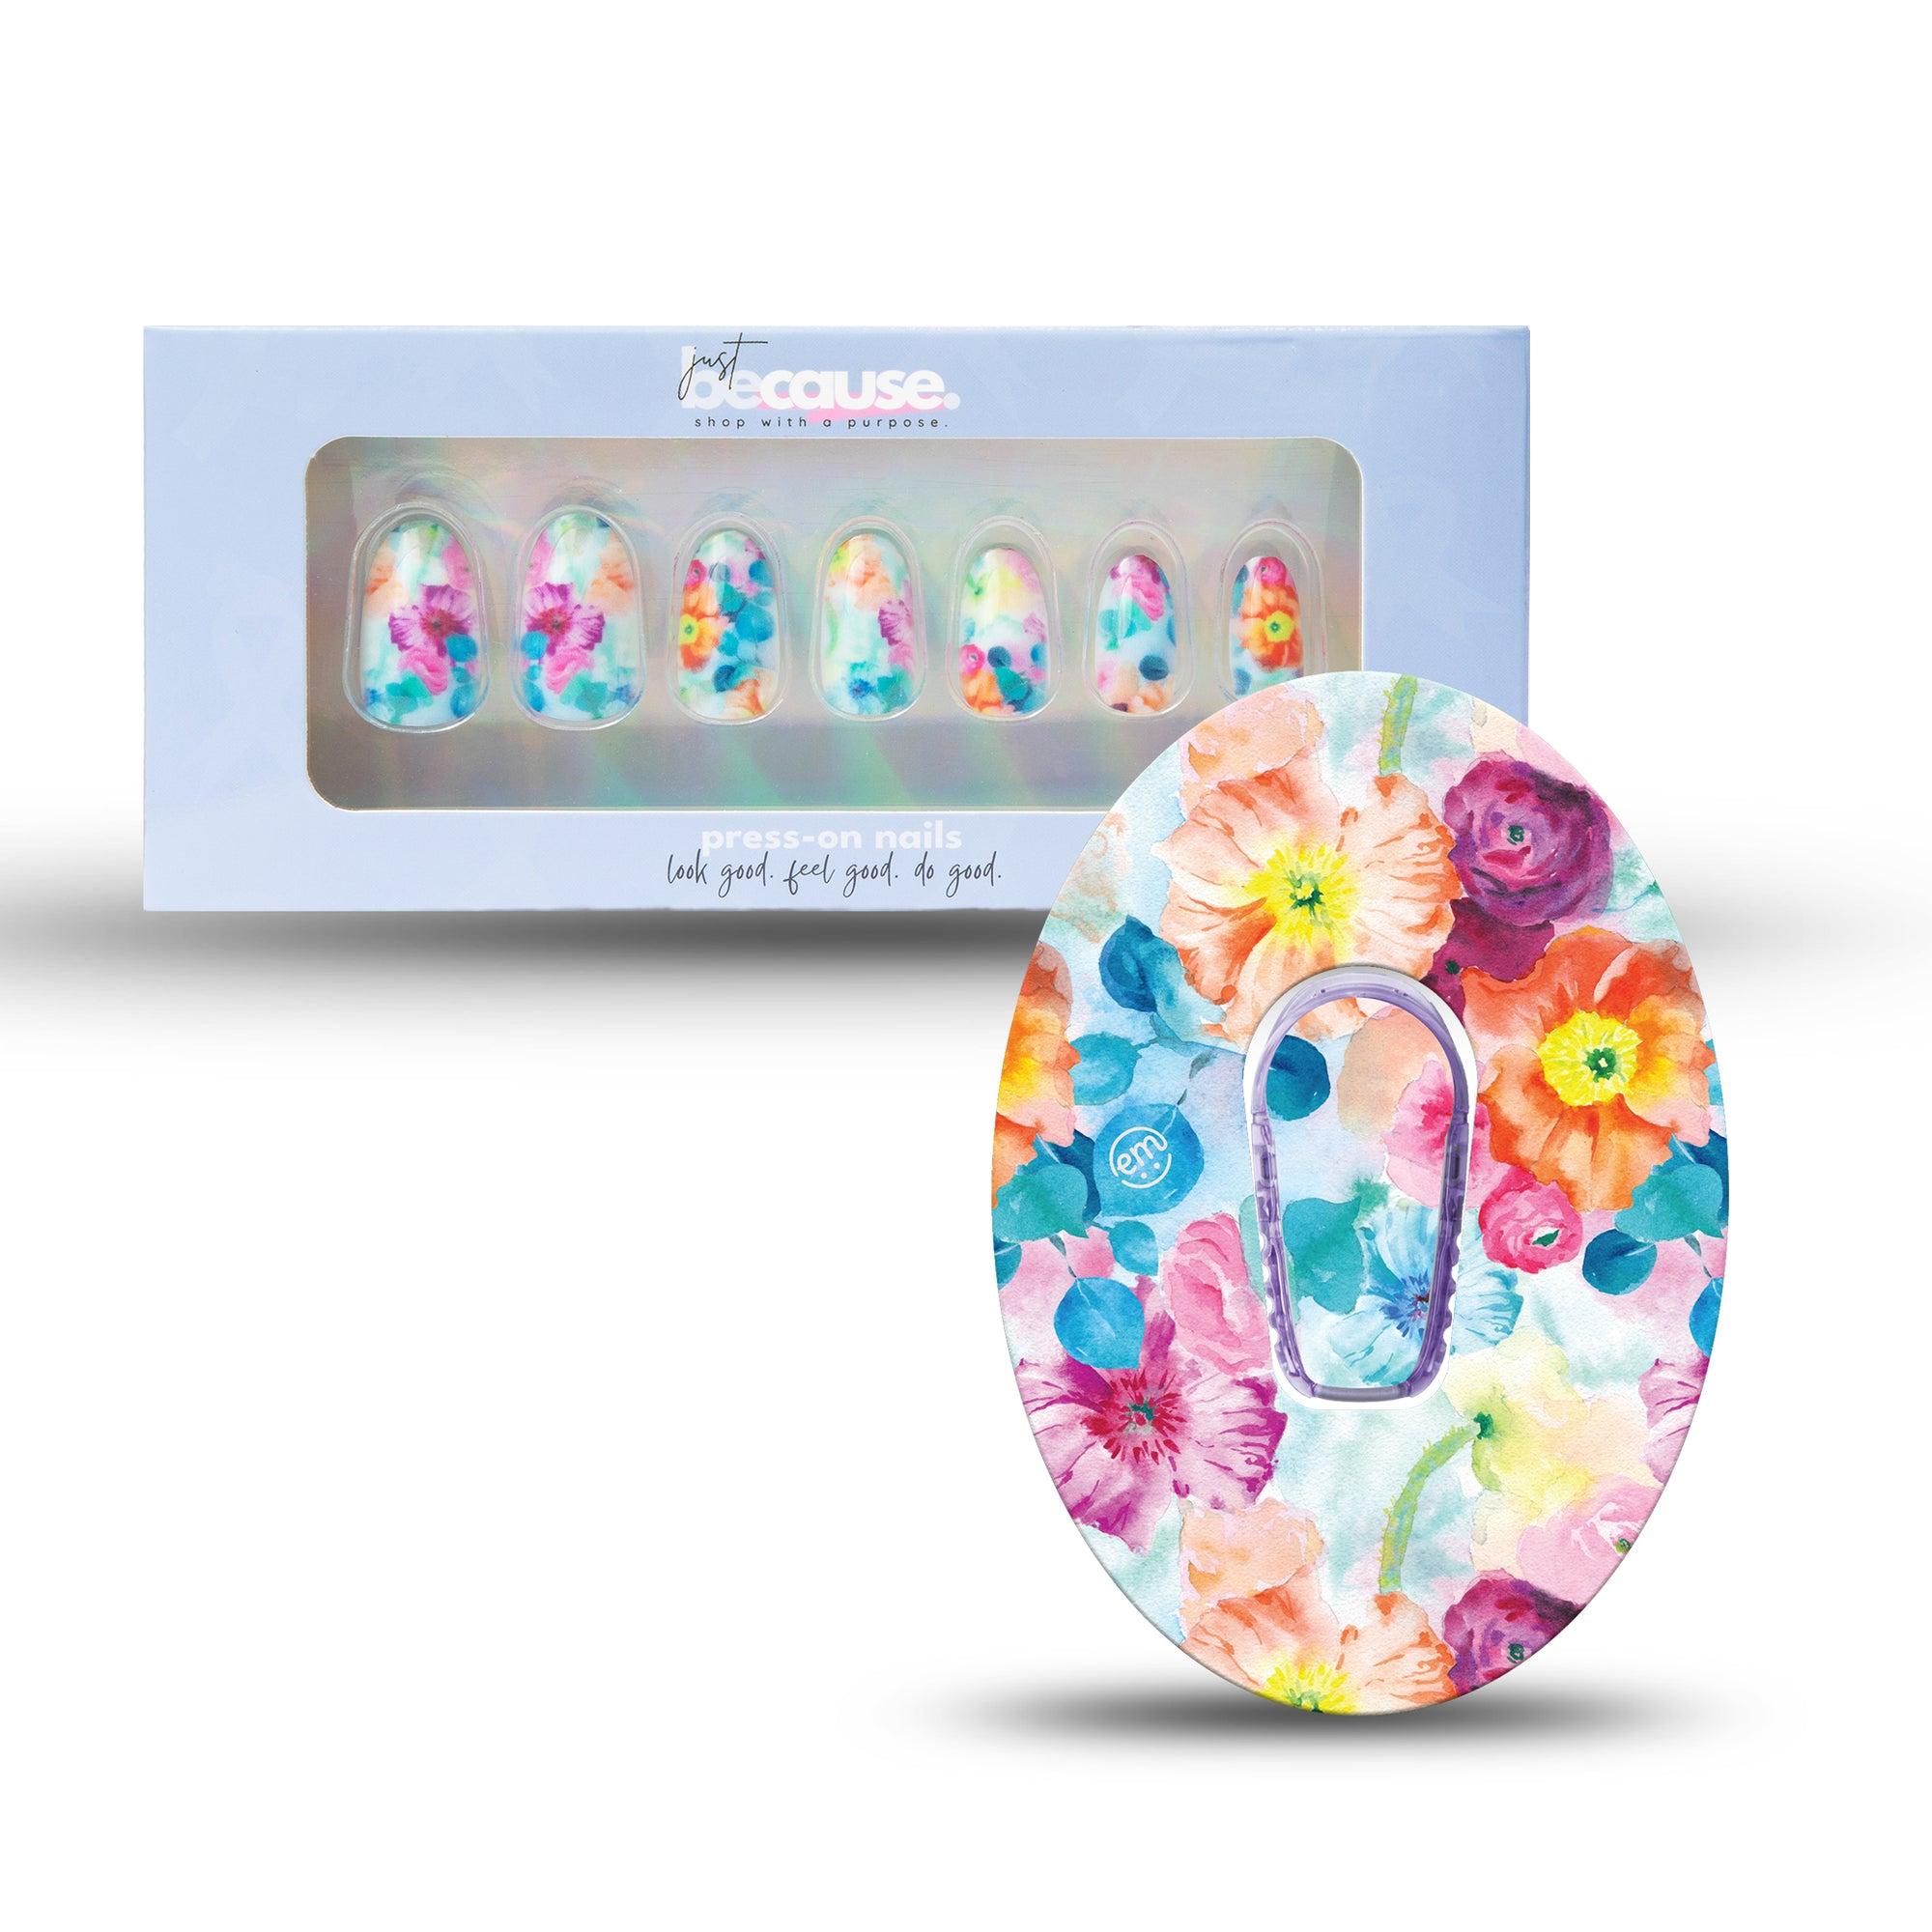 Just BeCause 24 Pcs ABS Press on nails Medium, watercolor pastel flowers design Fake Nails set with matching Watercolor Poppies Dexcom G6 Overlay Patch and Center Sticker, Support T1D - ExpressionMed.com	